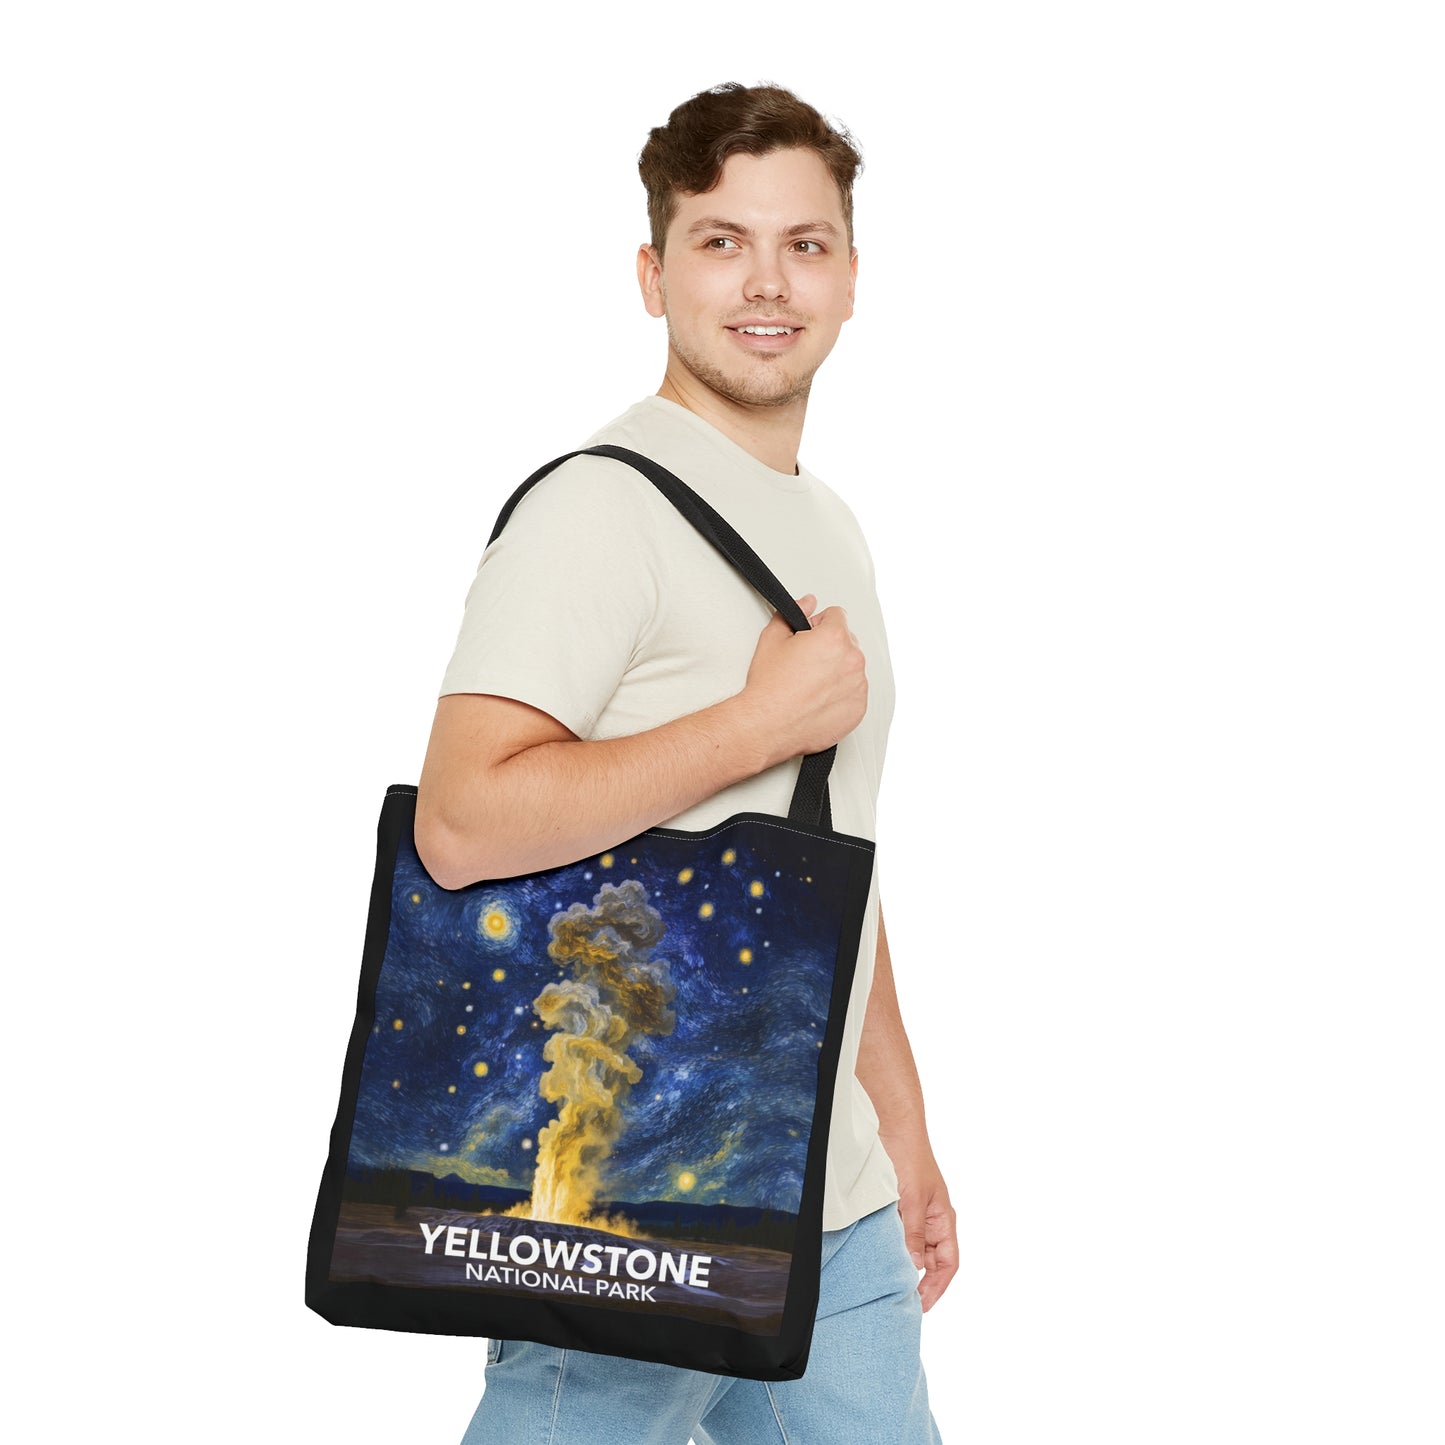 Yellowstone National Park Tote Bag - Old Faithful Starry Night